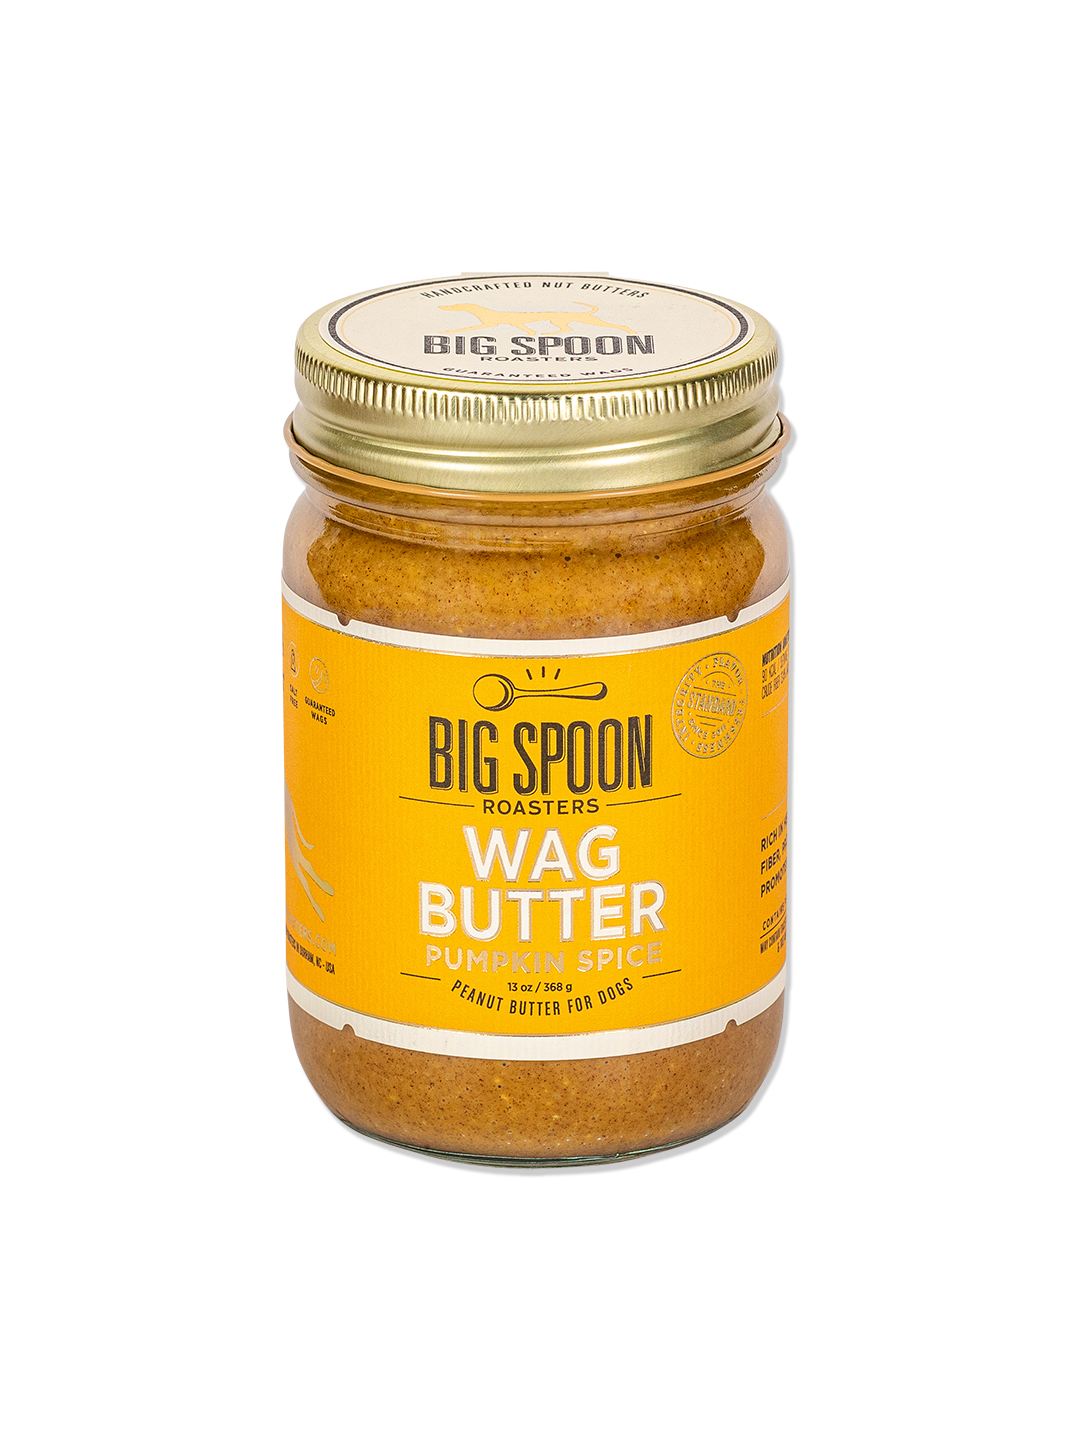 Pumpkin Spice Wag Butter  Big Spoon Roasters 13oz Jar  -better made easy-eco-friendly-sustainable-gifting